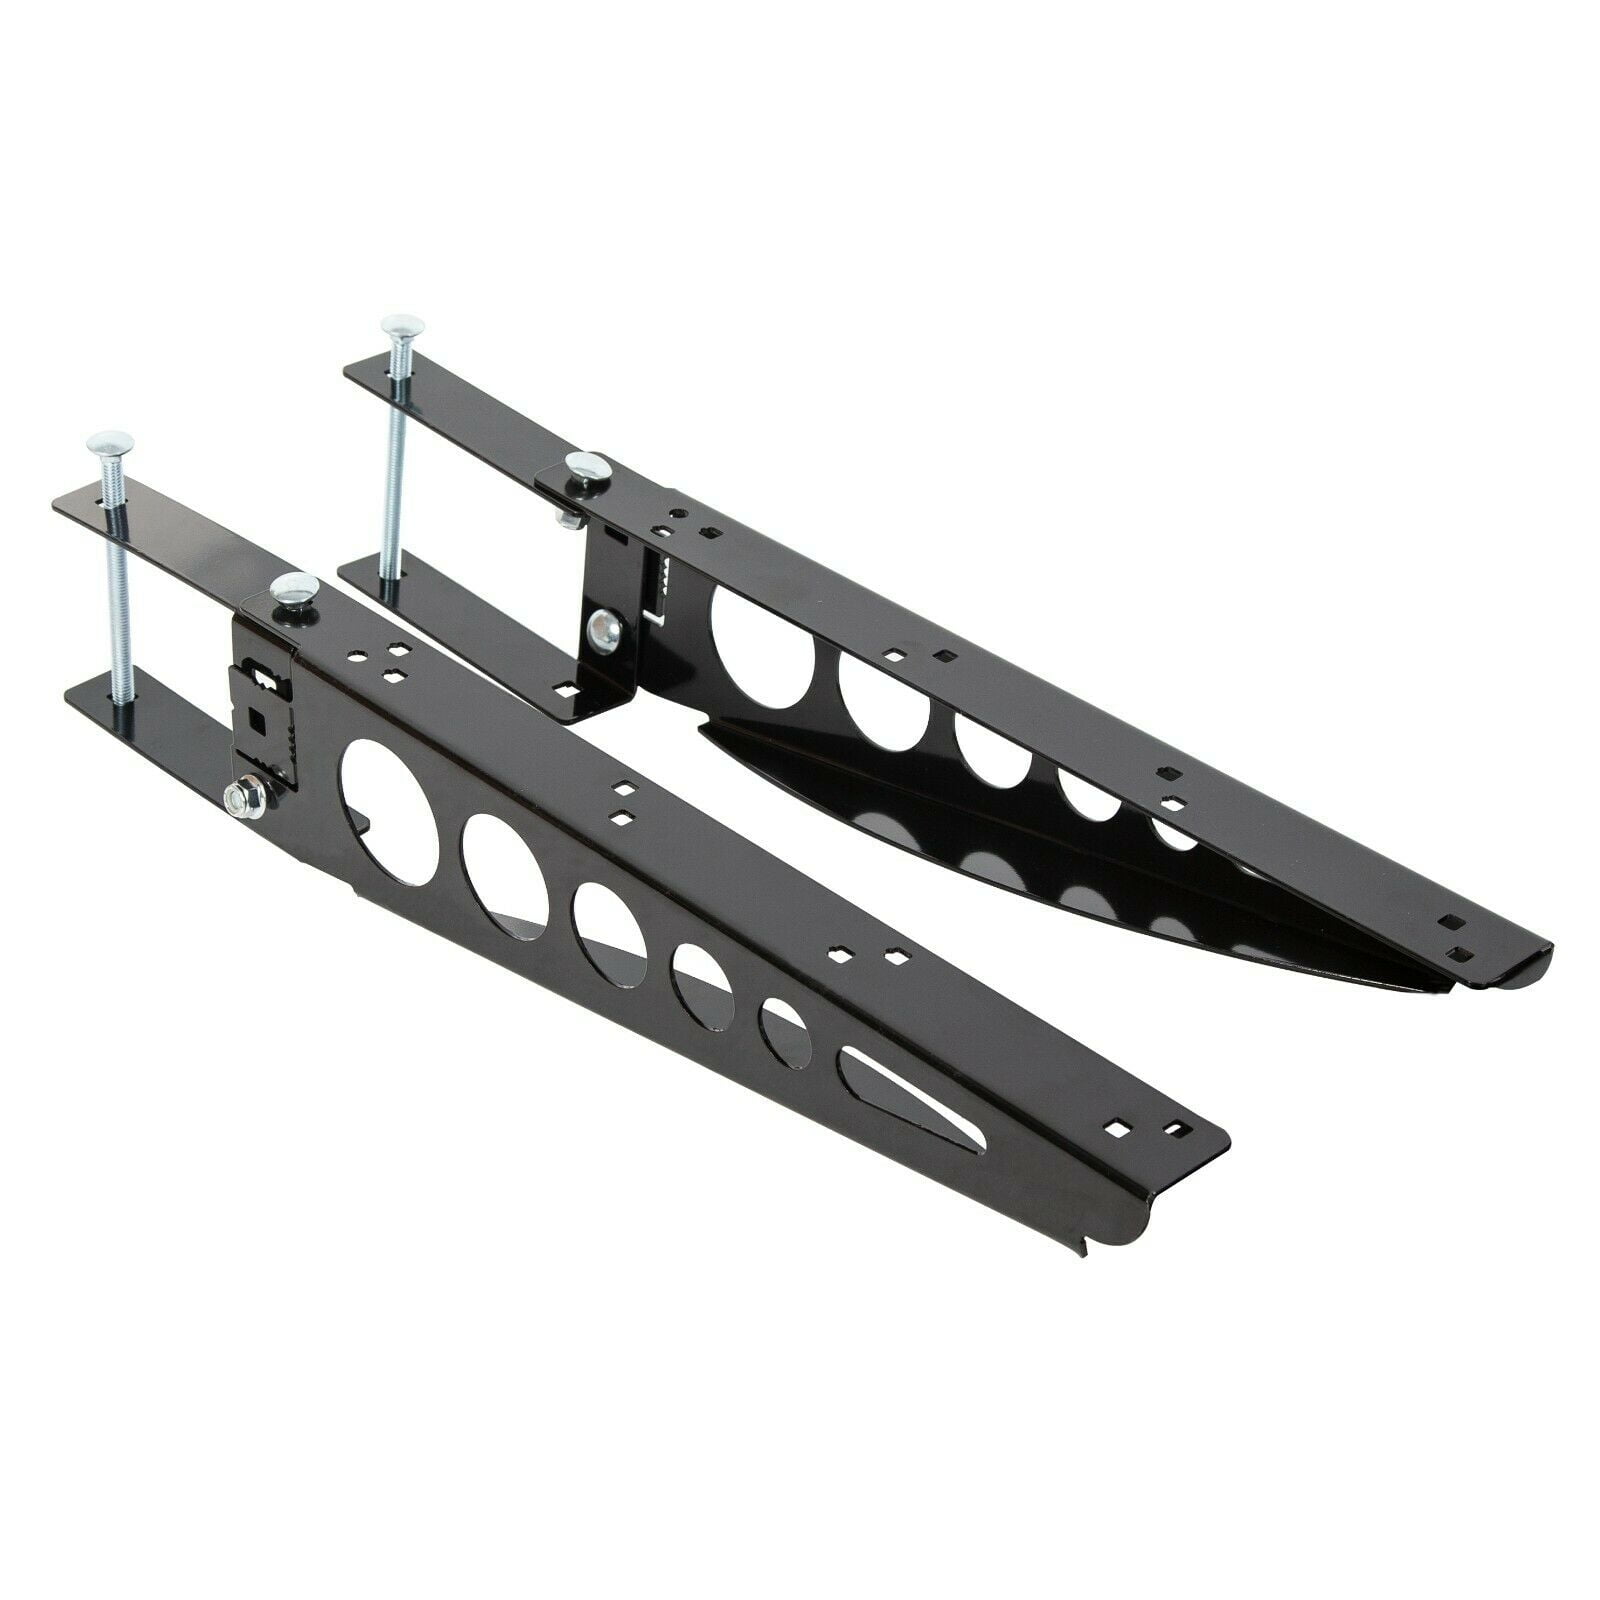 4" RV Square Bumper Brackets For Mounting Cargo Box Support Arms Trailer Camper 